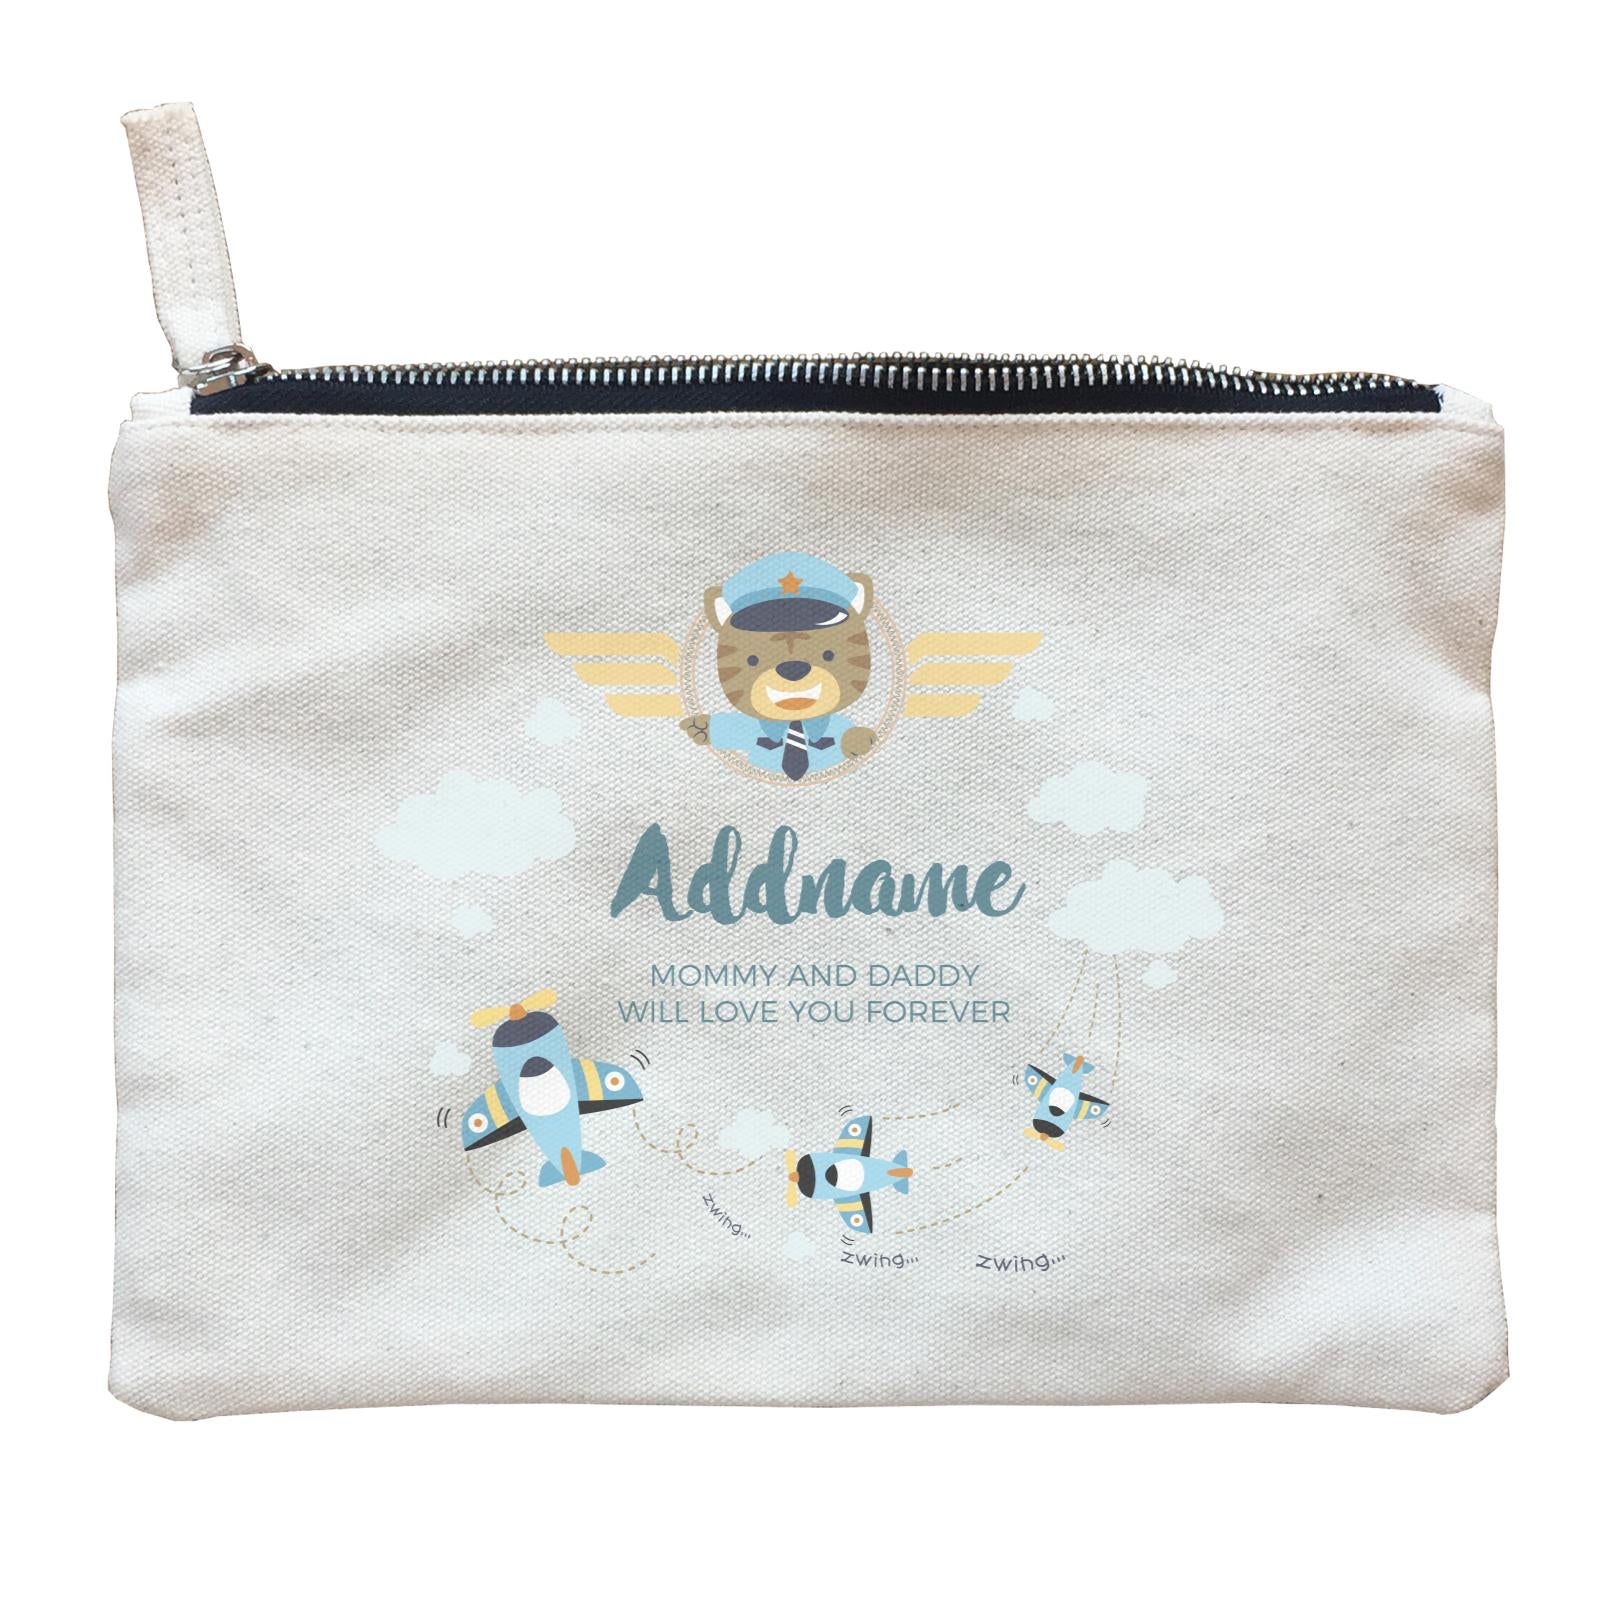 Cute Bear Pilot and Blue Planes Flying Personalizable with Name and Text Zipper Pouch